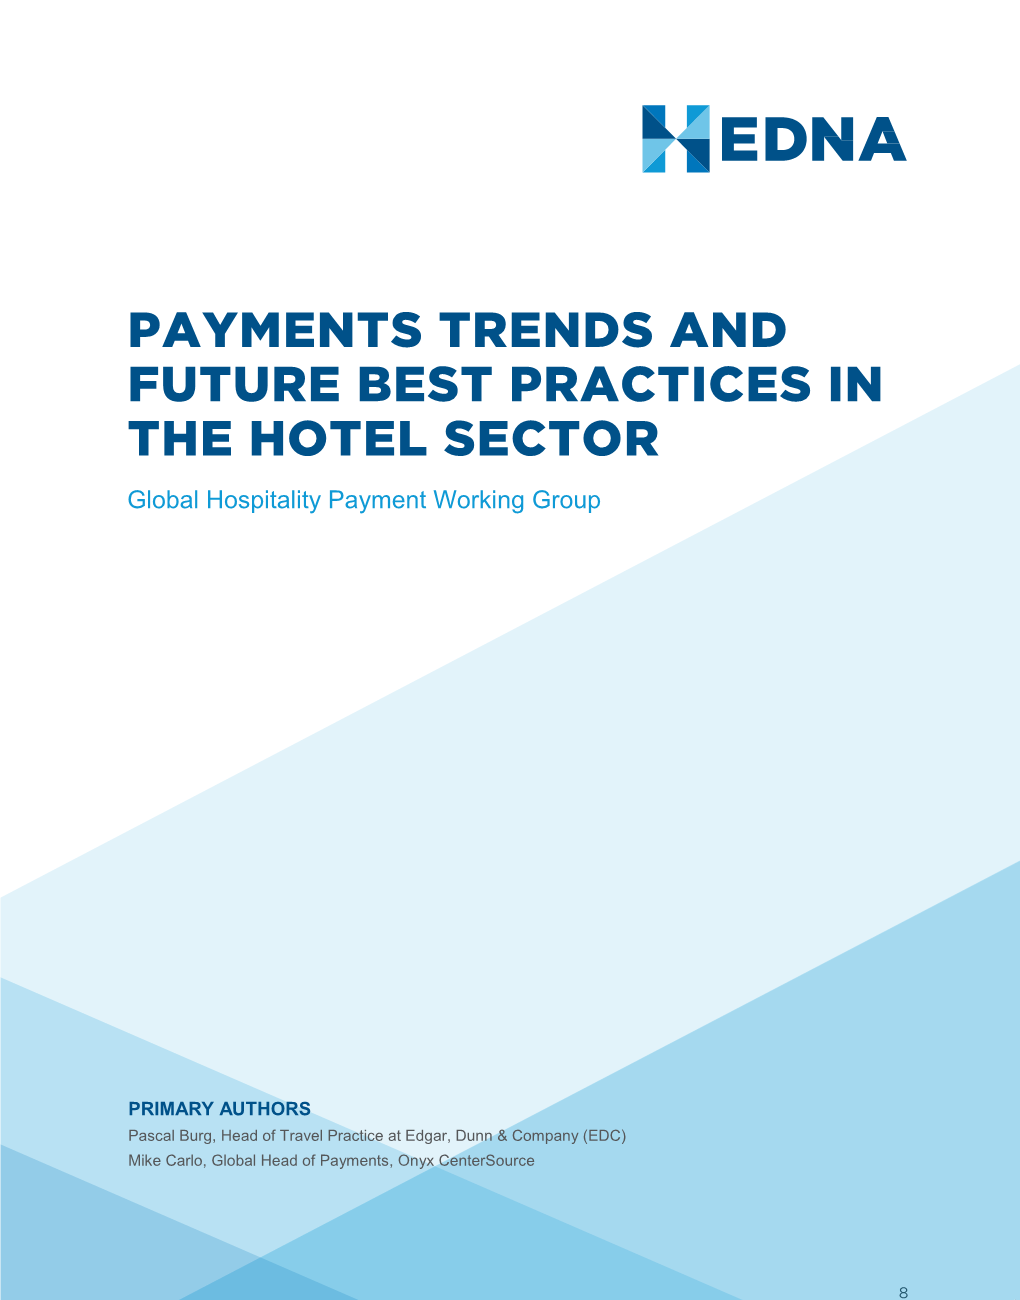 Payments Trends and Future Best Practices in the Hotel Sector